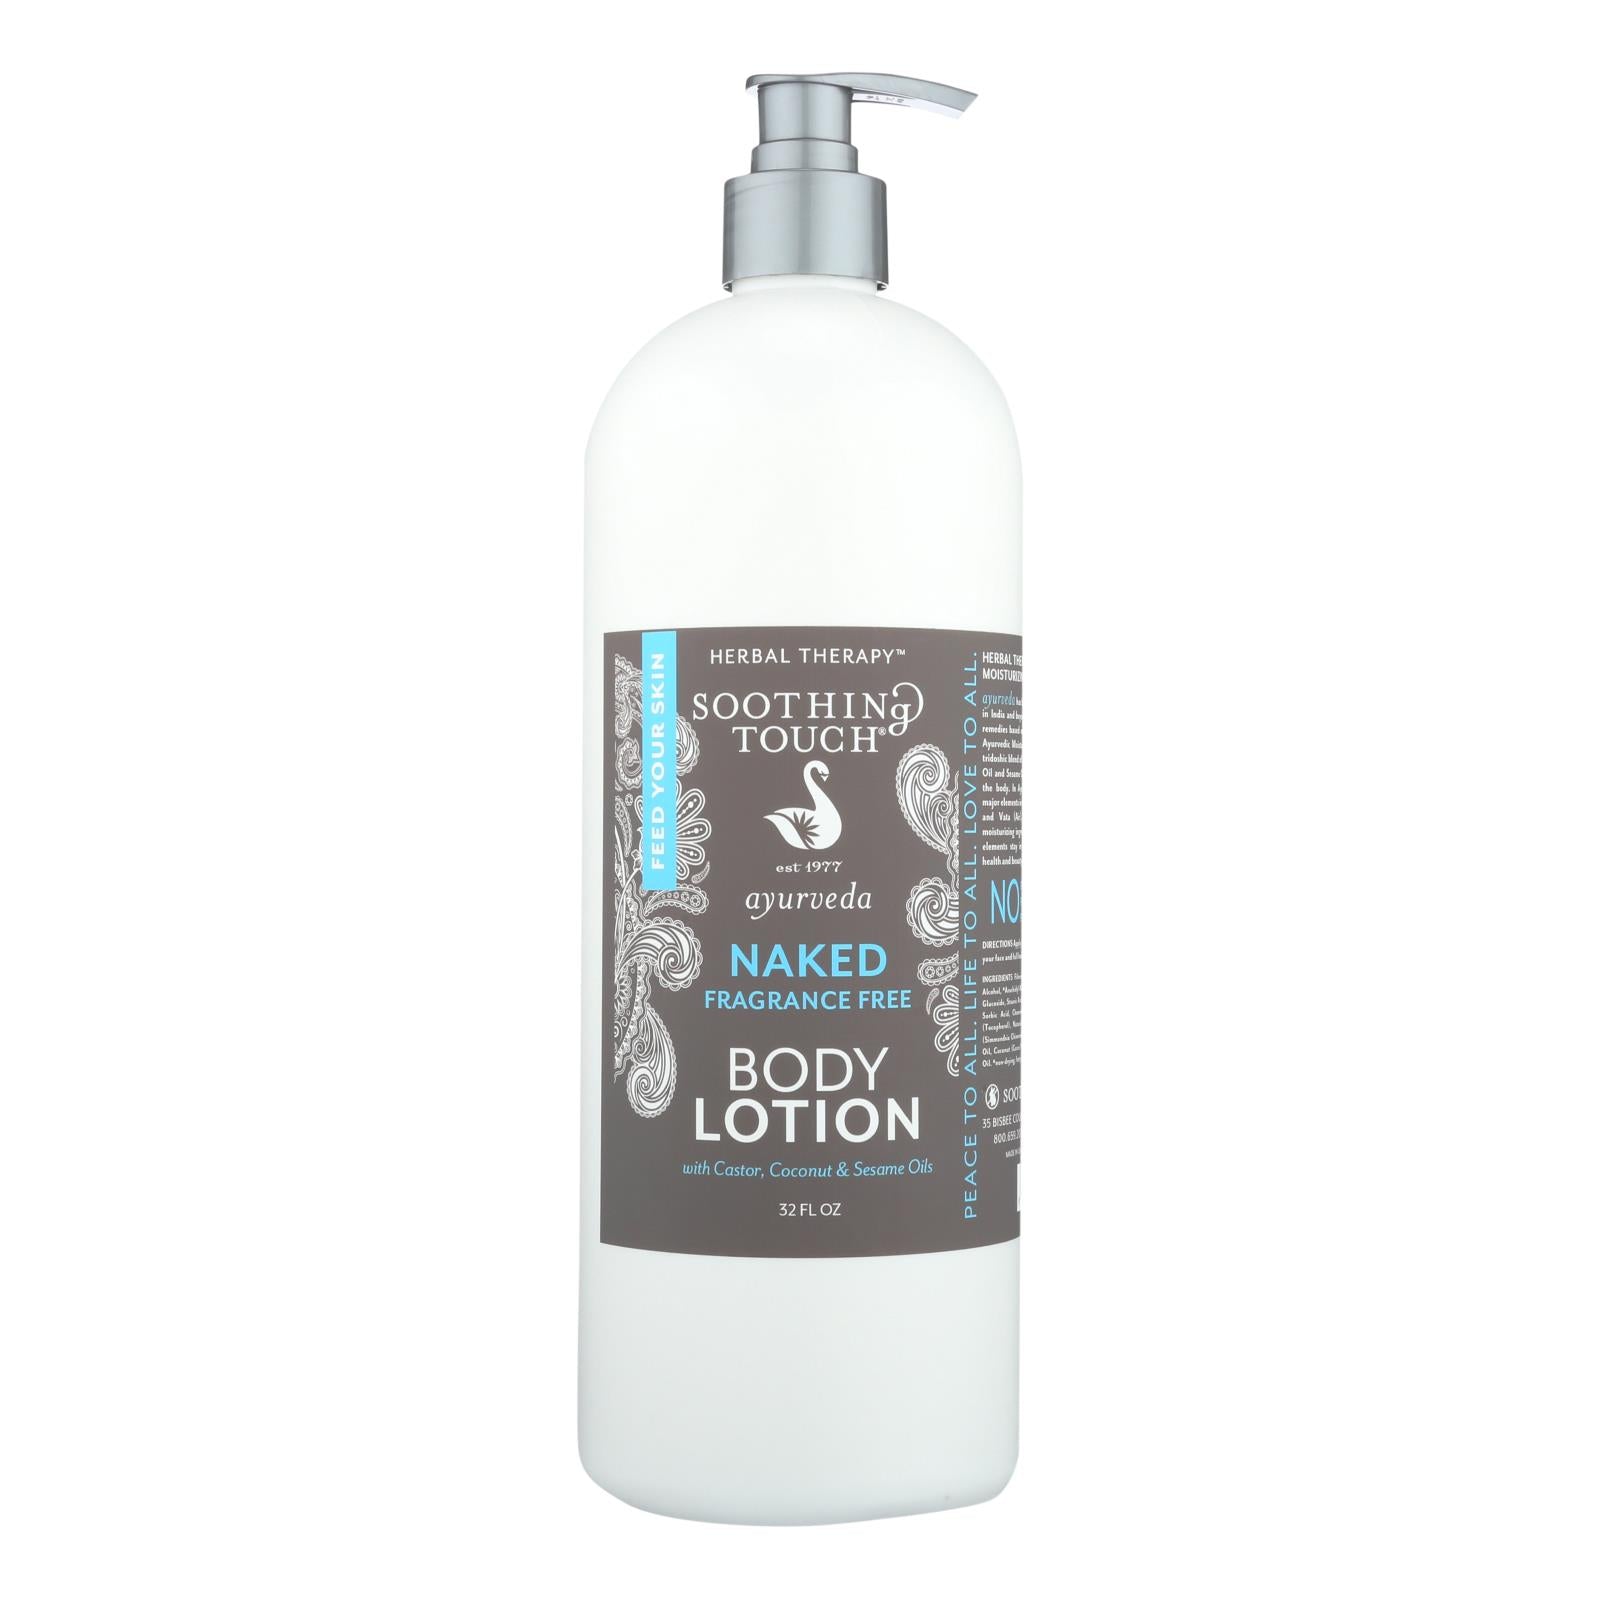 Soothing Touch - Naked Body Lotion - 32 Fz